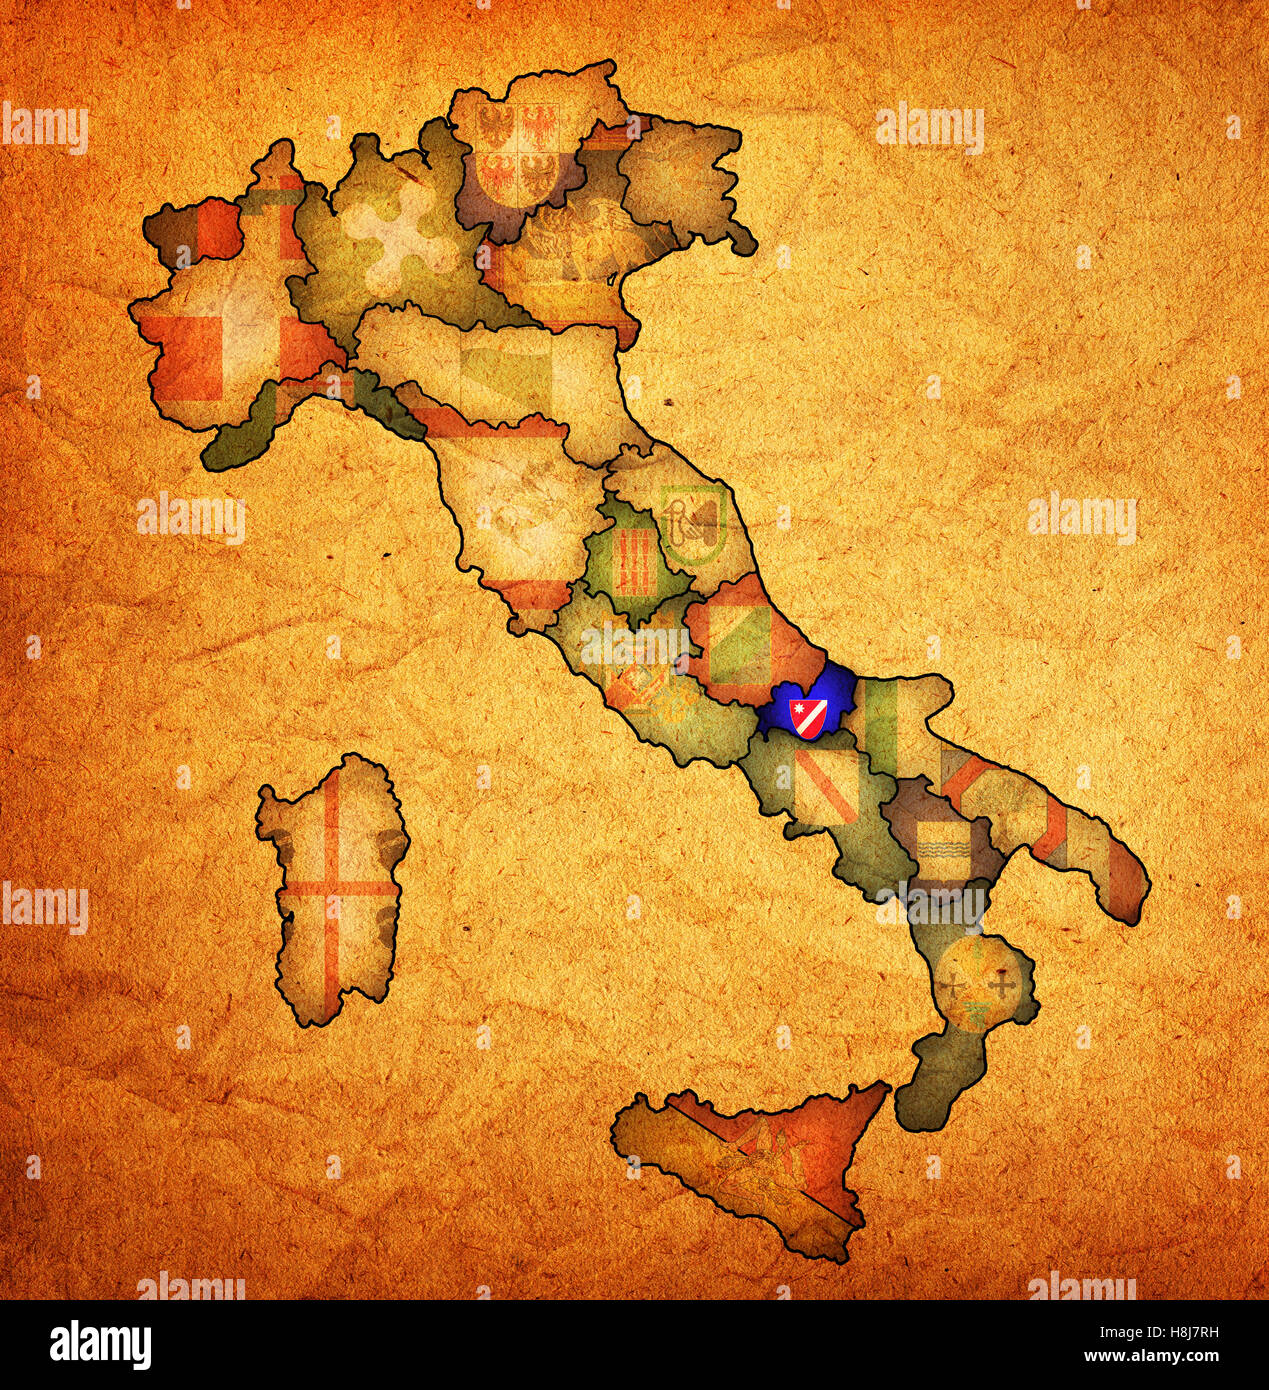 molise region on administration map of italy with flags Stock Photo